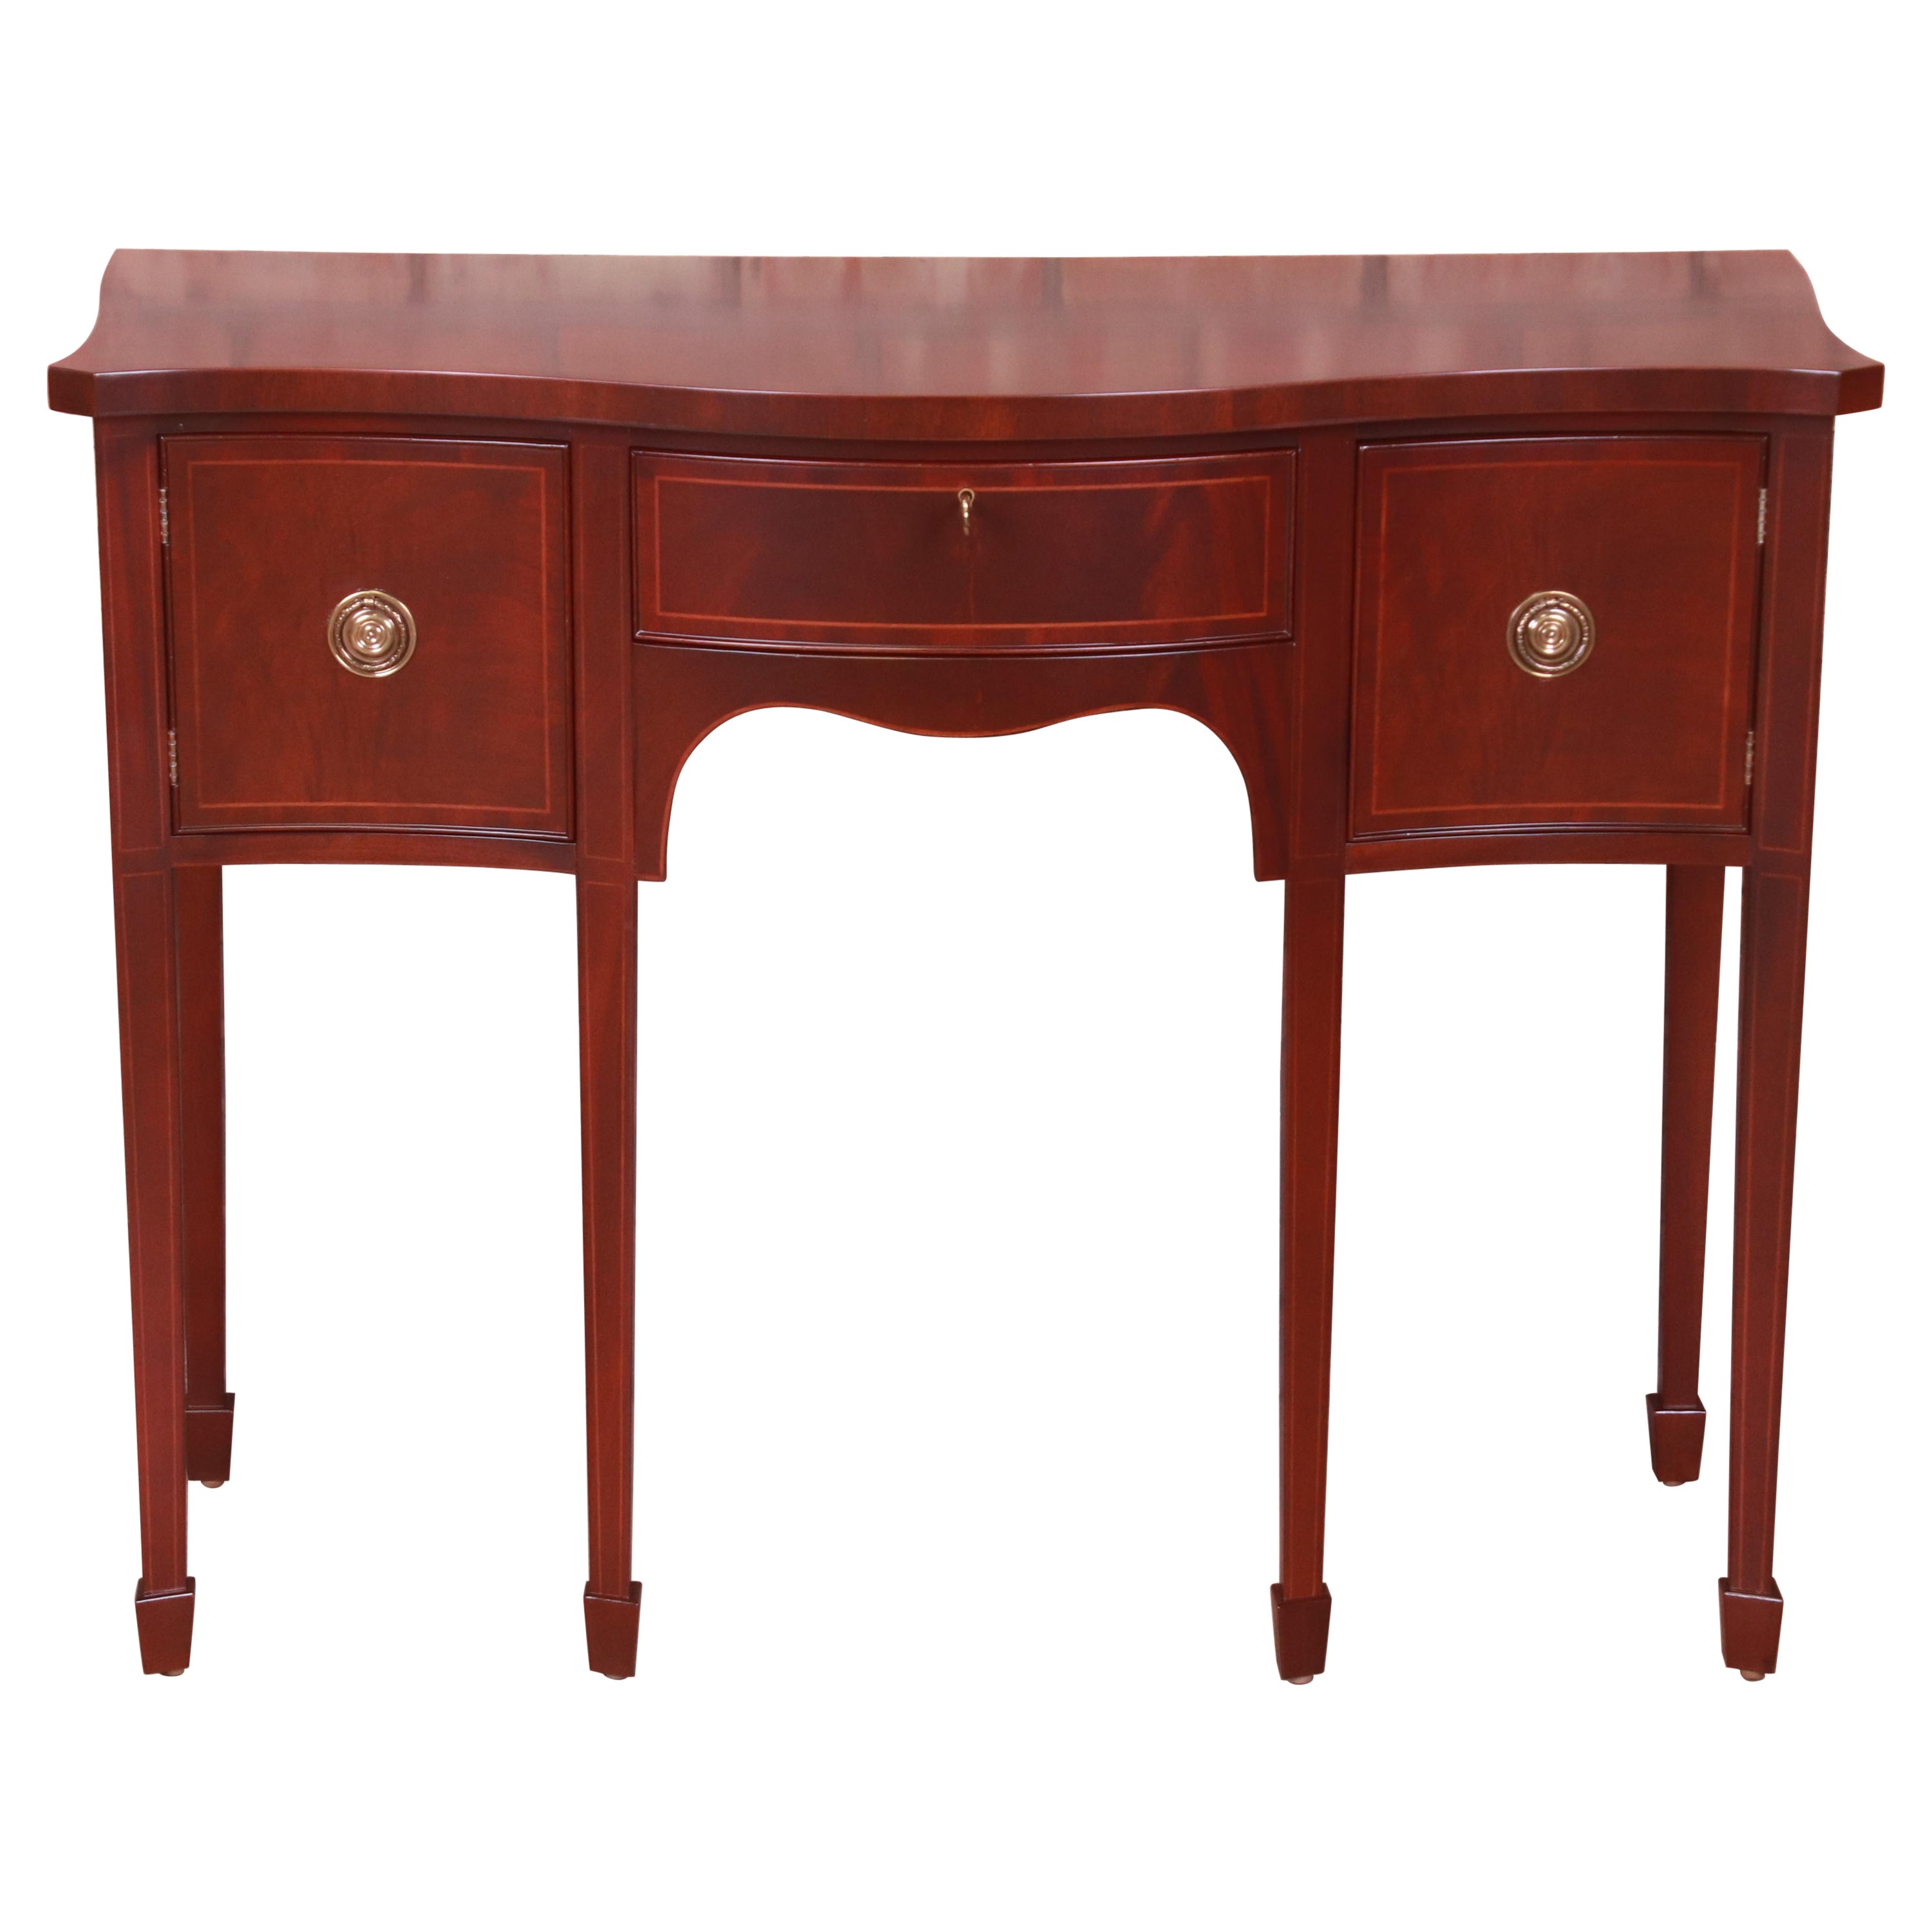 Baker Furniture Federal Mahogany Sideboard or Console